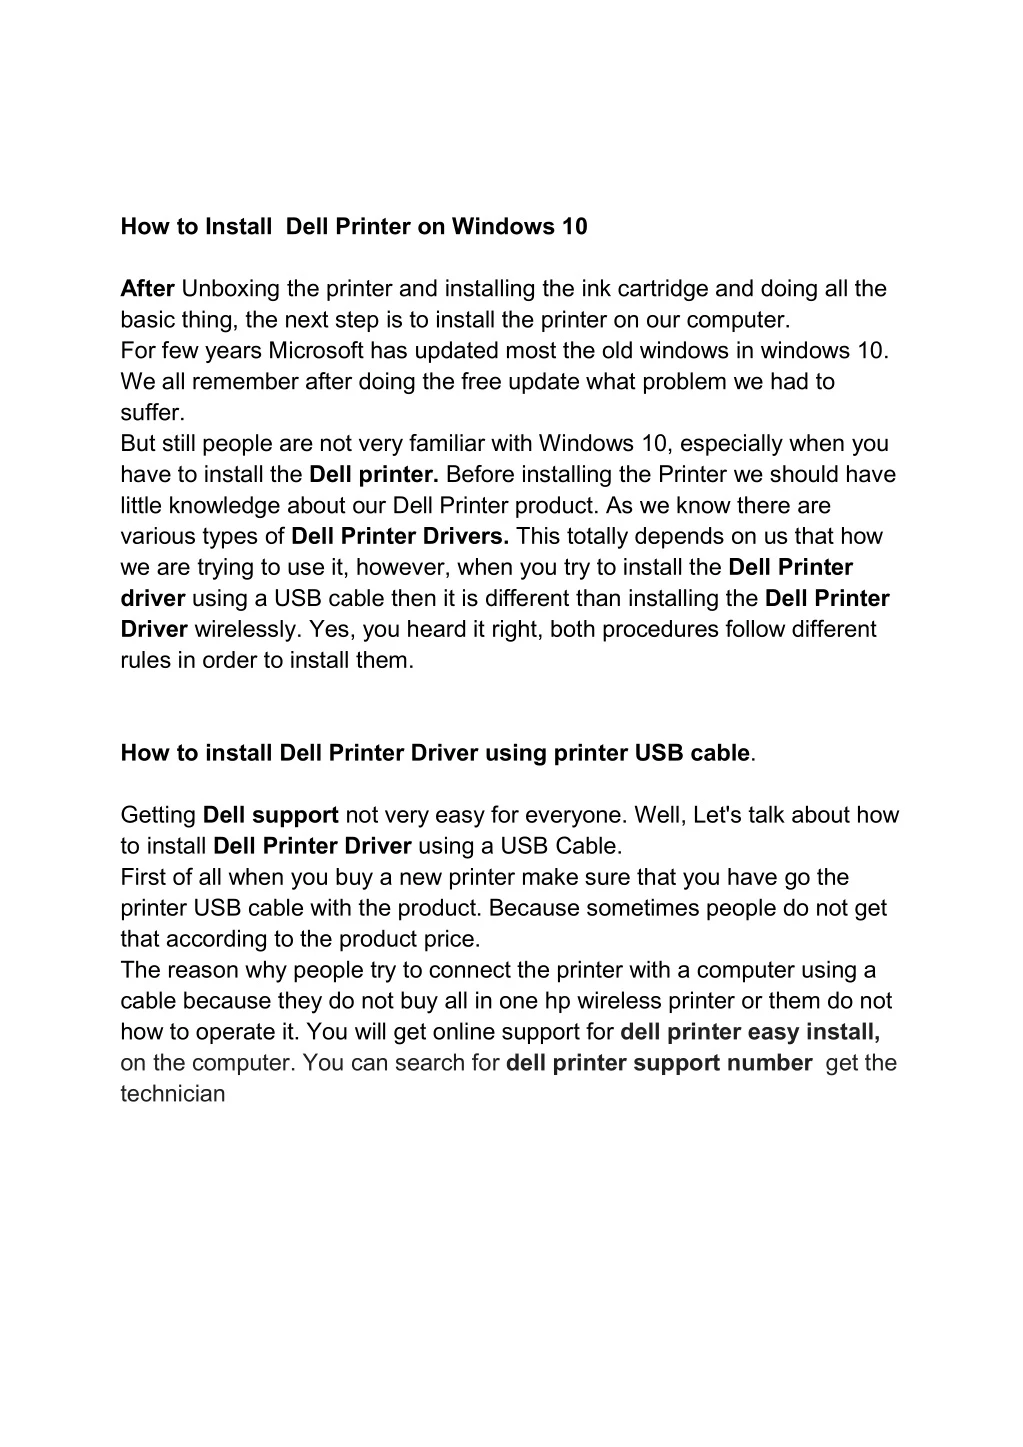 how to install dell printer on windows 10 after